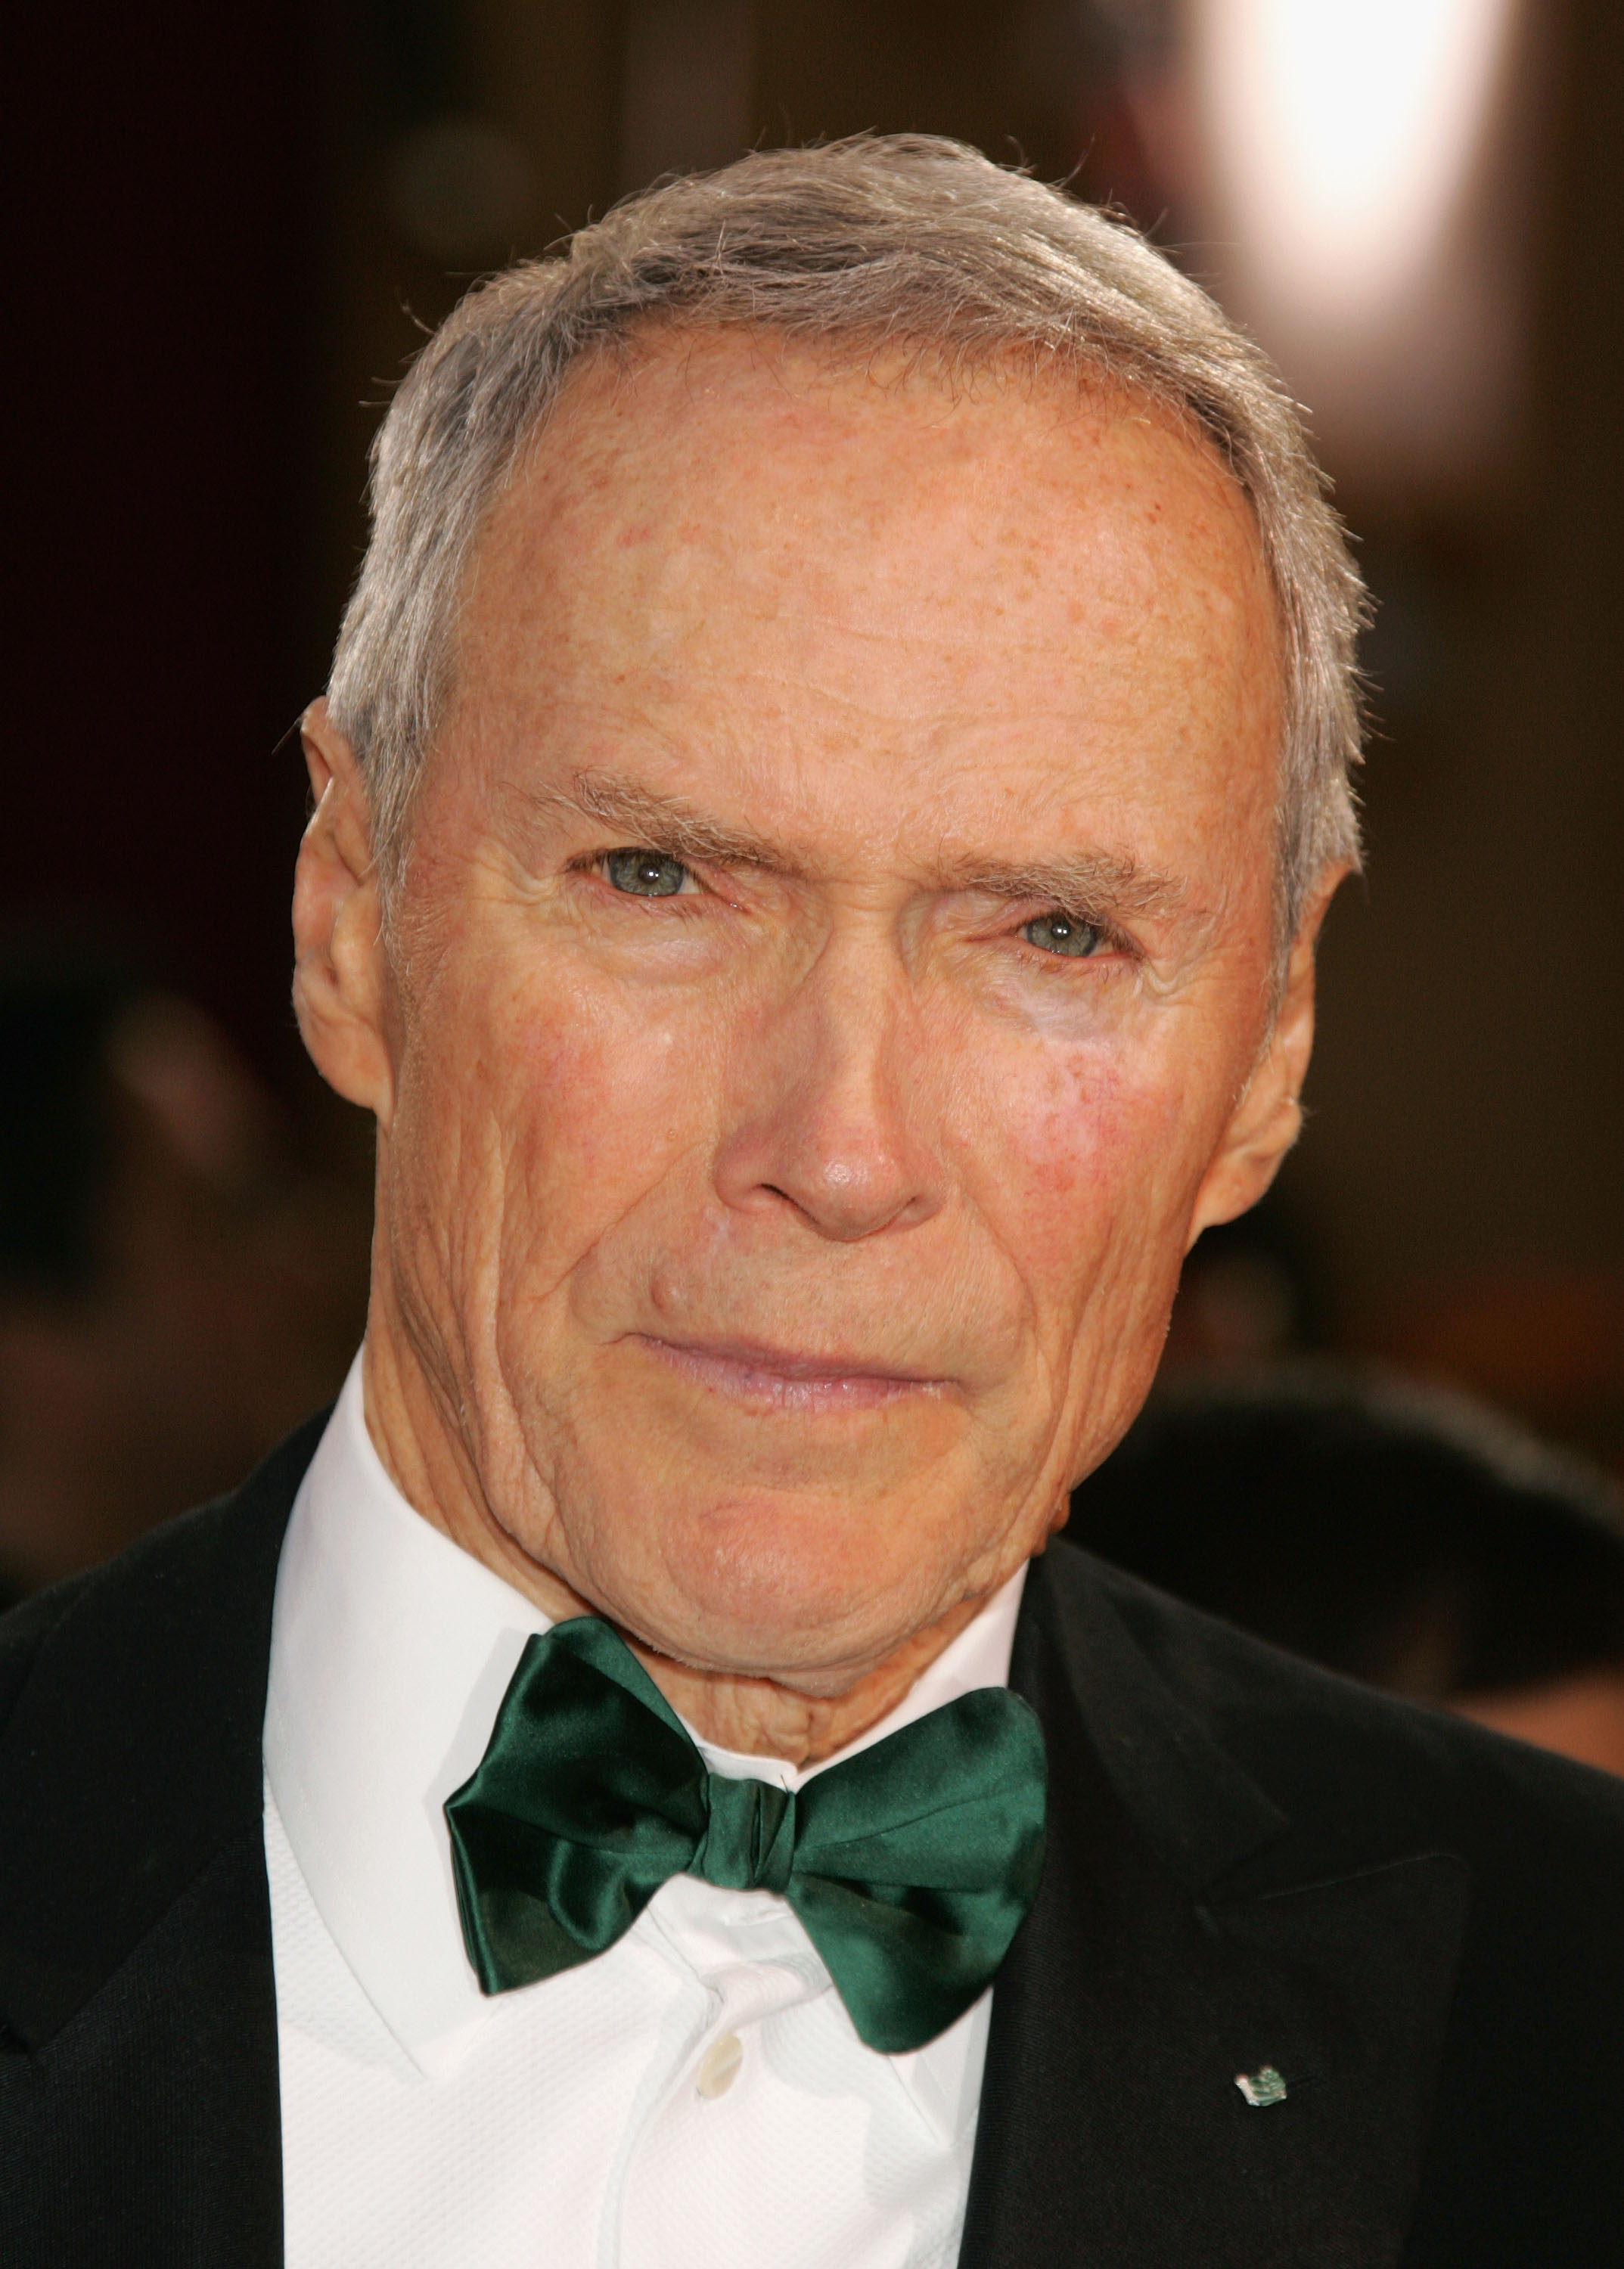 Clint Eastwood at the 77th Annual Academy Awards in Hollywood, California on February 27, 2005 | Source: Getty Images